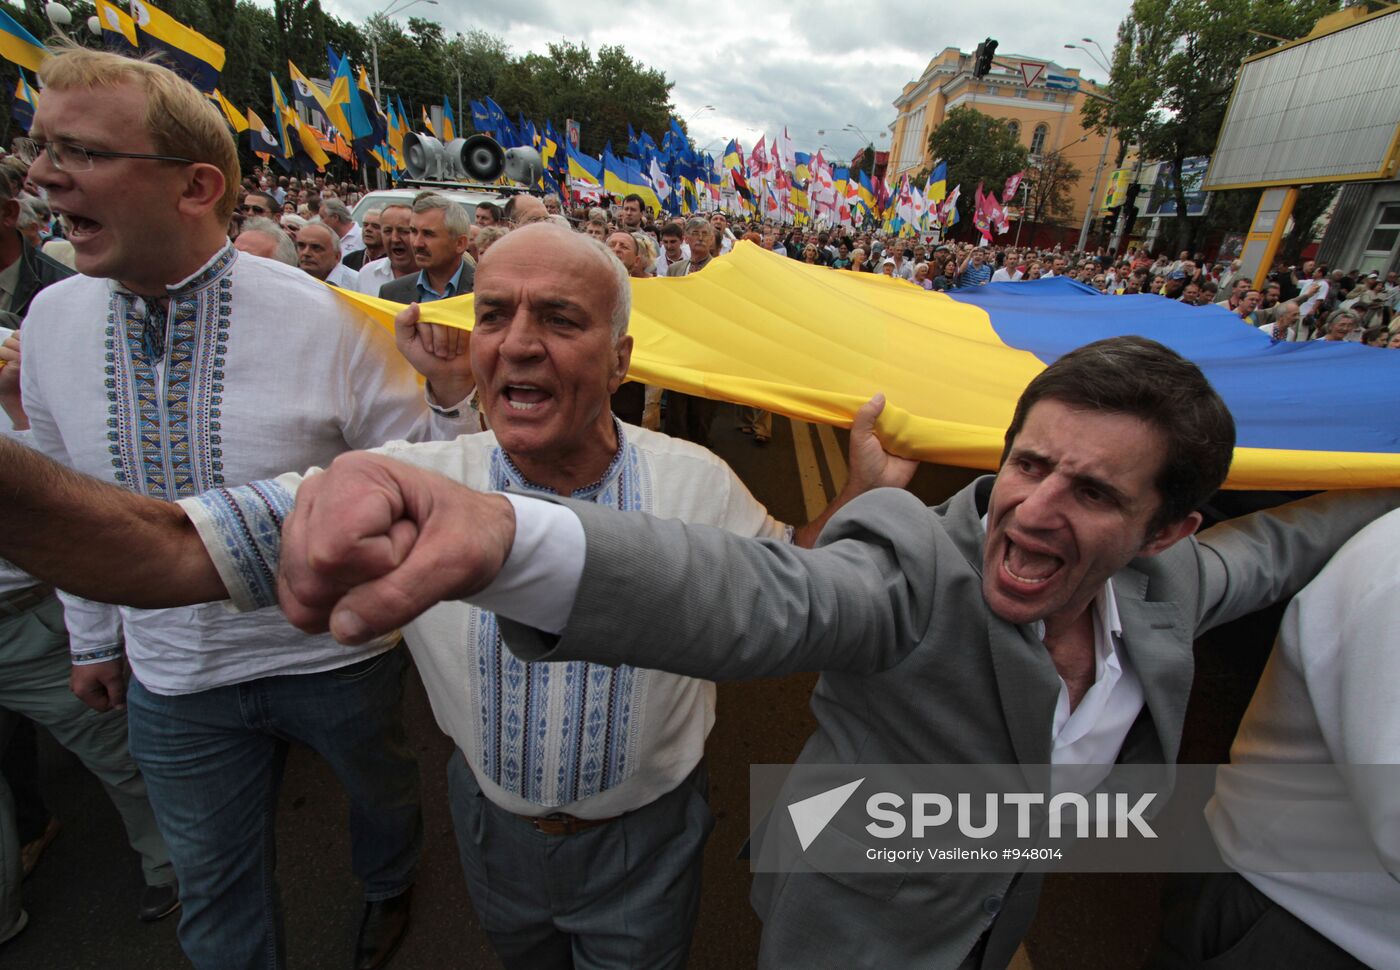 Ukrainian opposition movements stage rally on Independence Day